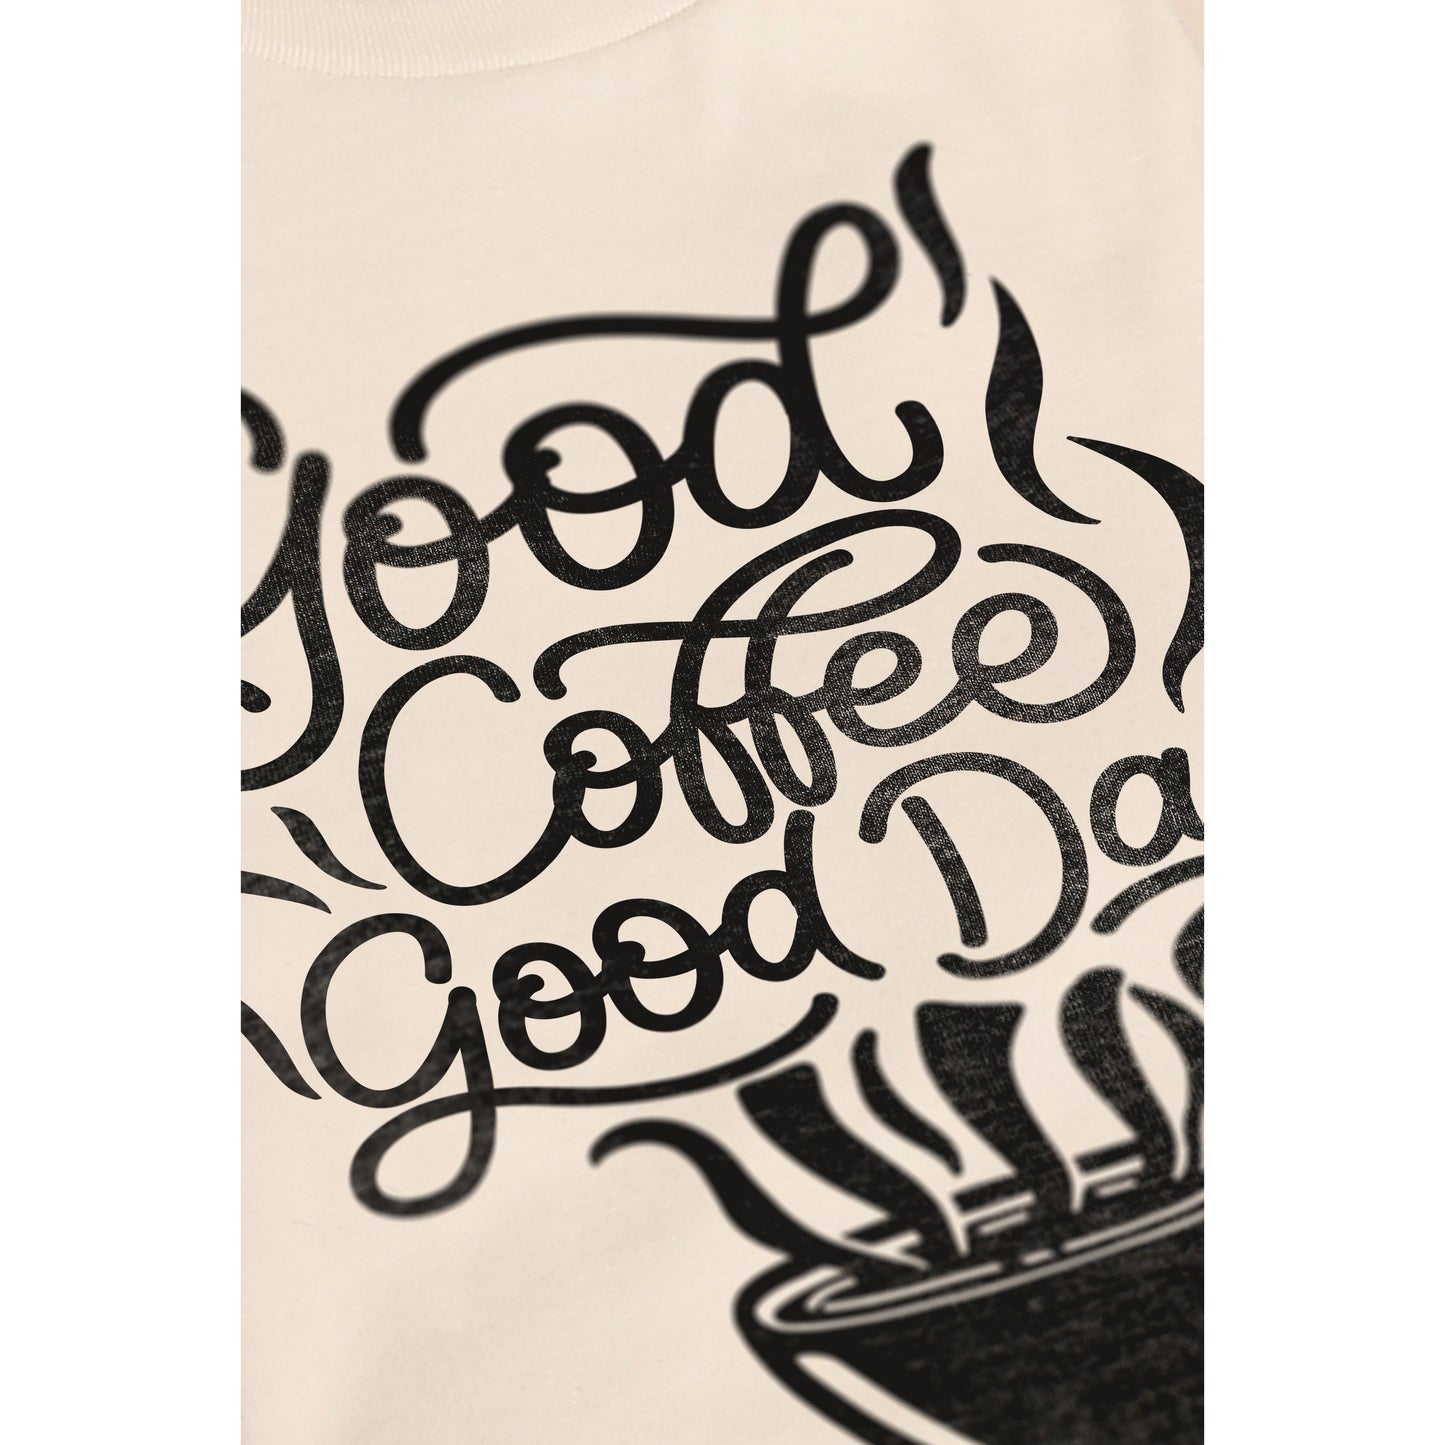 Good Coffee Good Day - Stories You Can Wear by Thread Tank